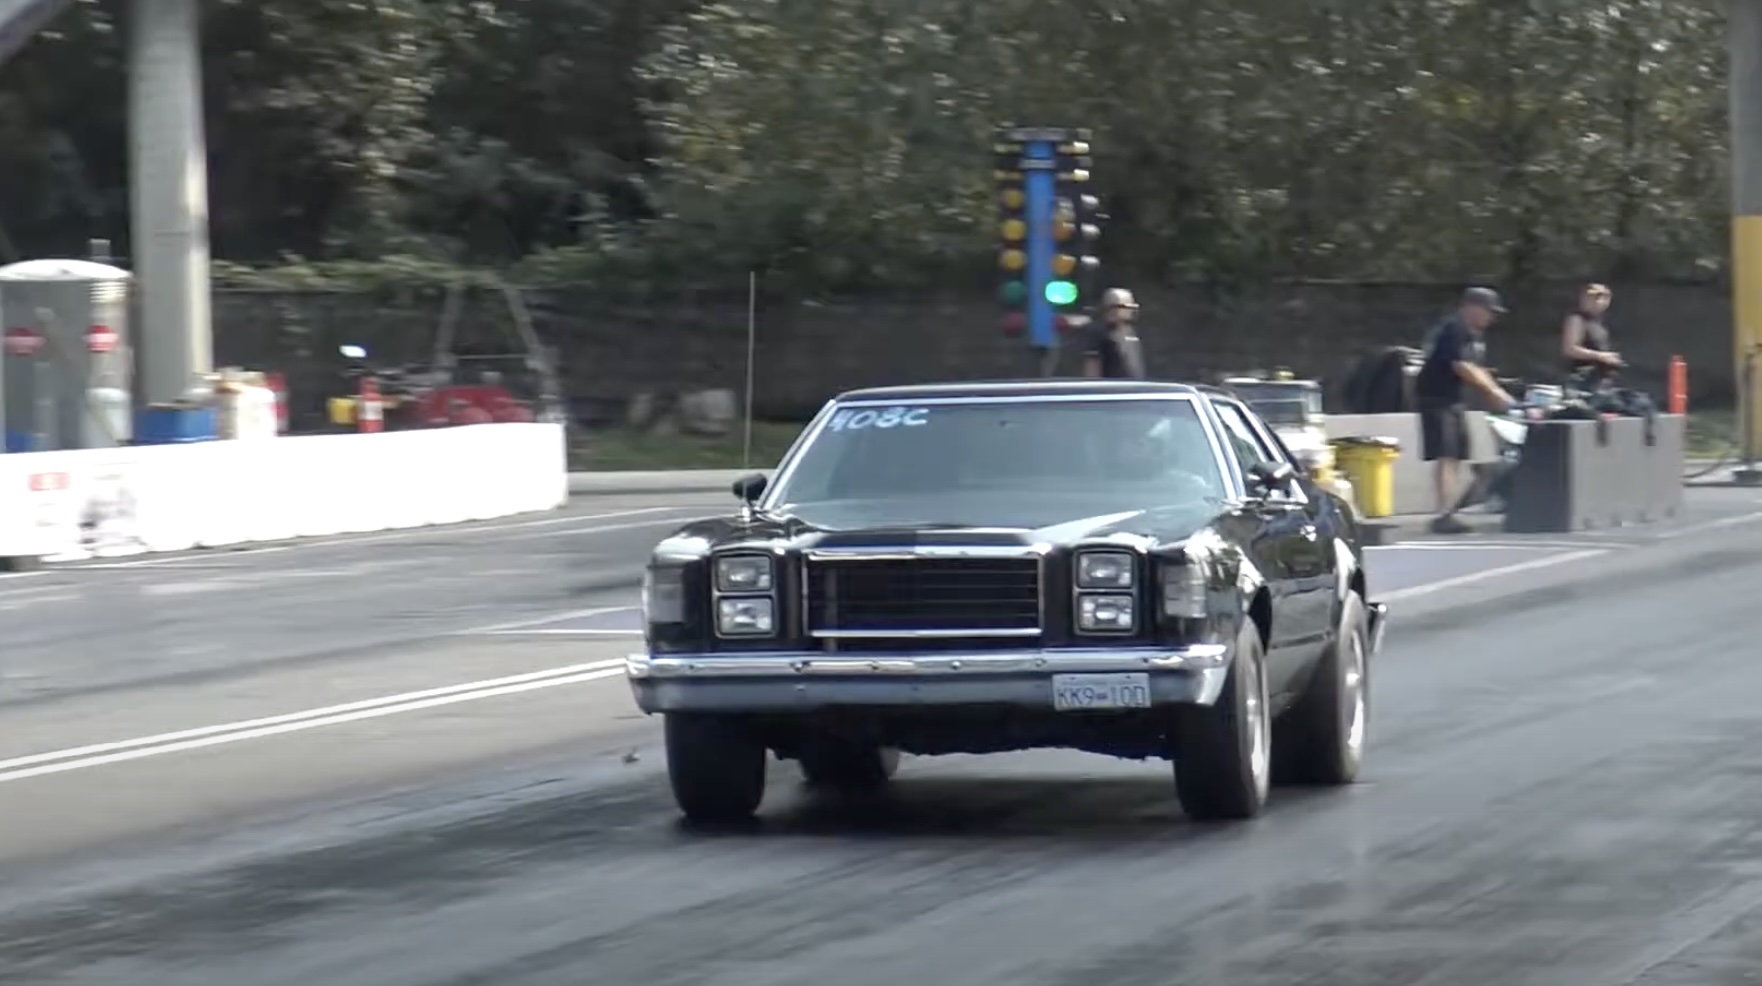 Morning Symphony: Banging Gears In A Stick-Shifted Ford LTD II